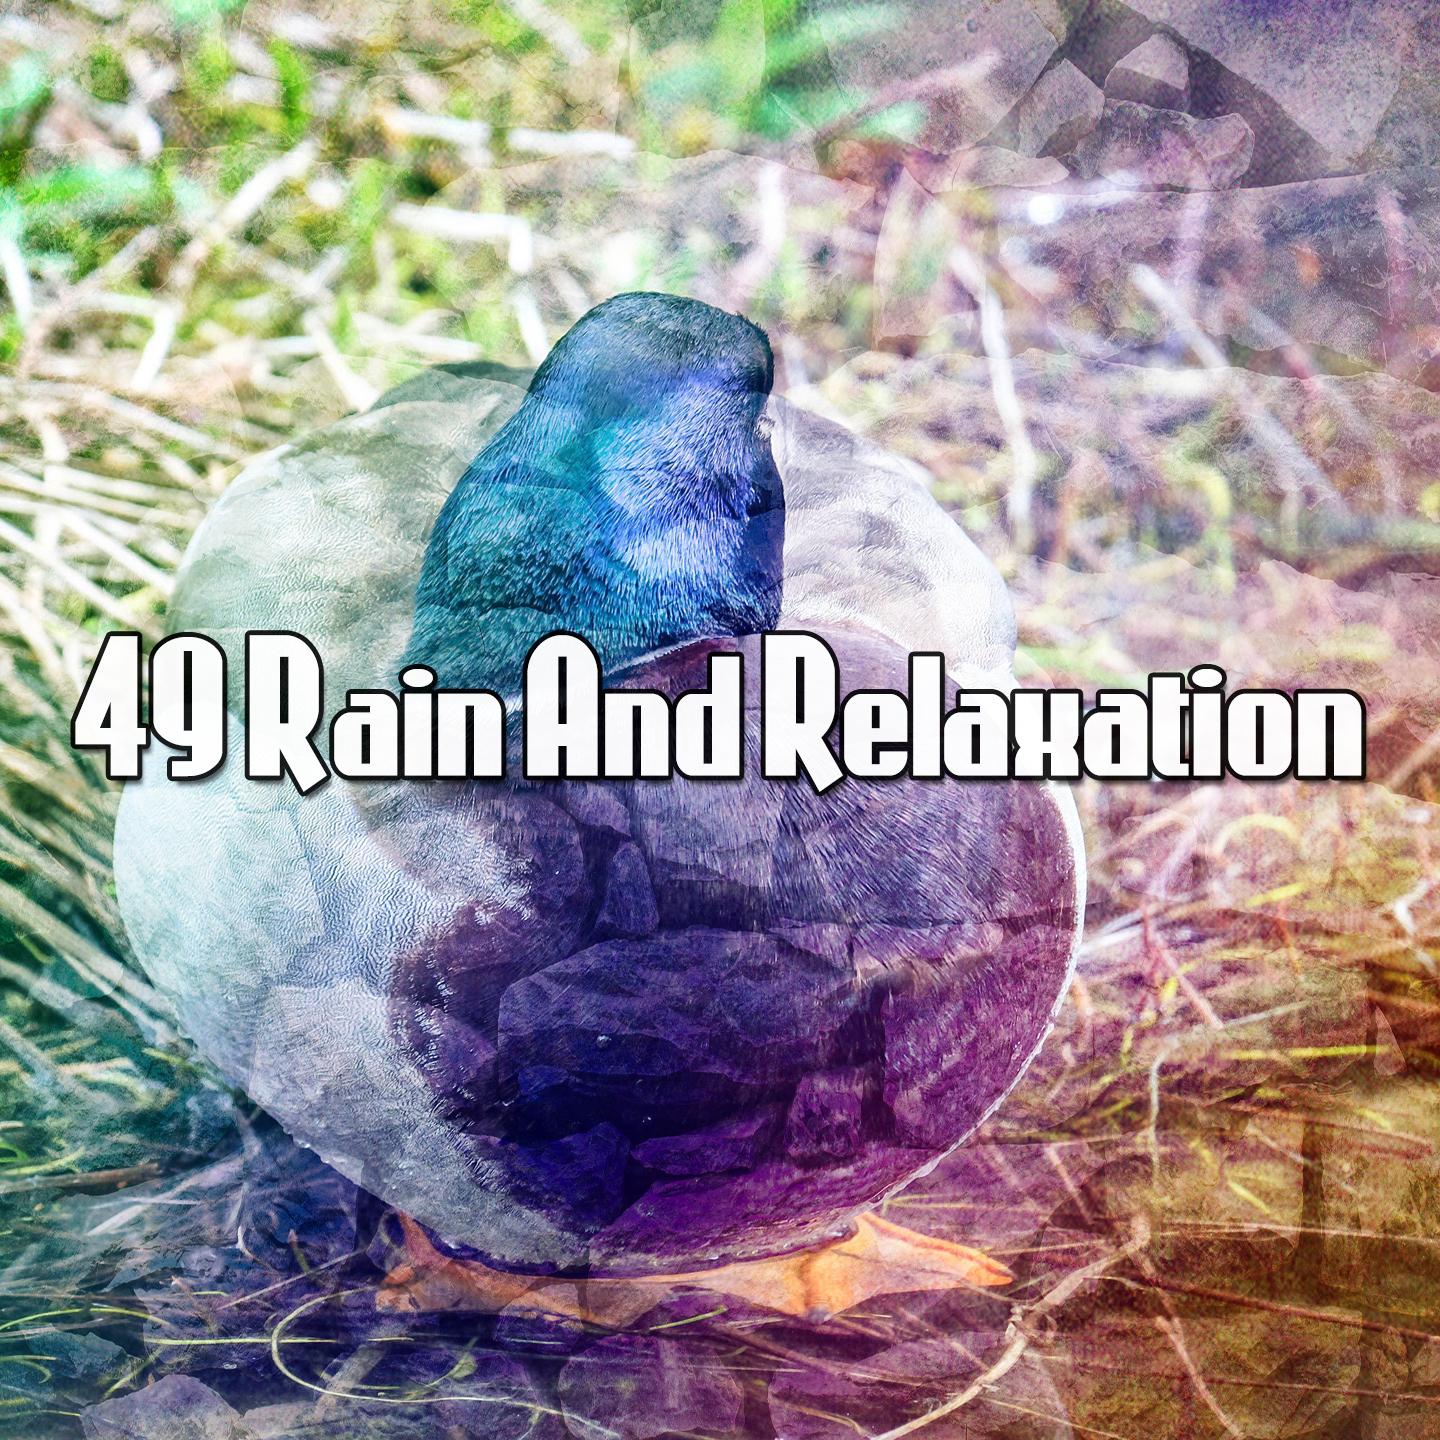 49 Rain And Relaxation